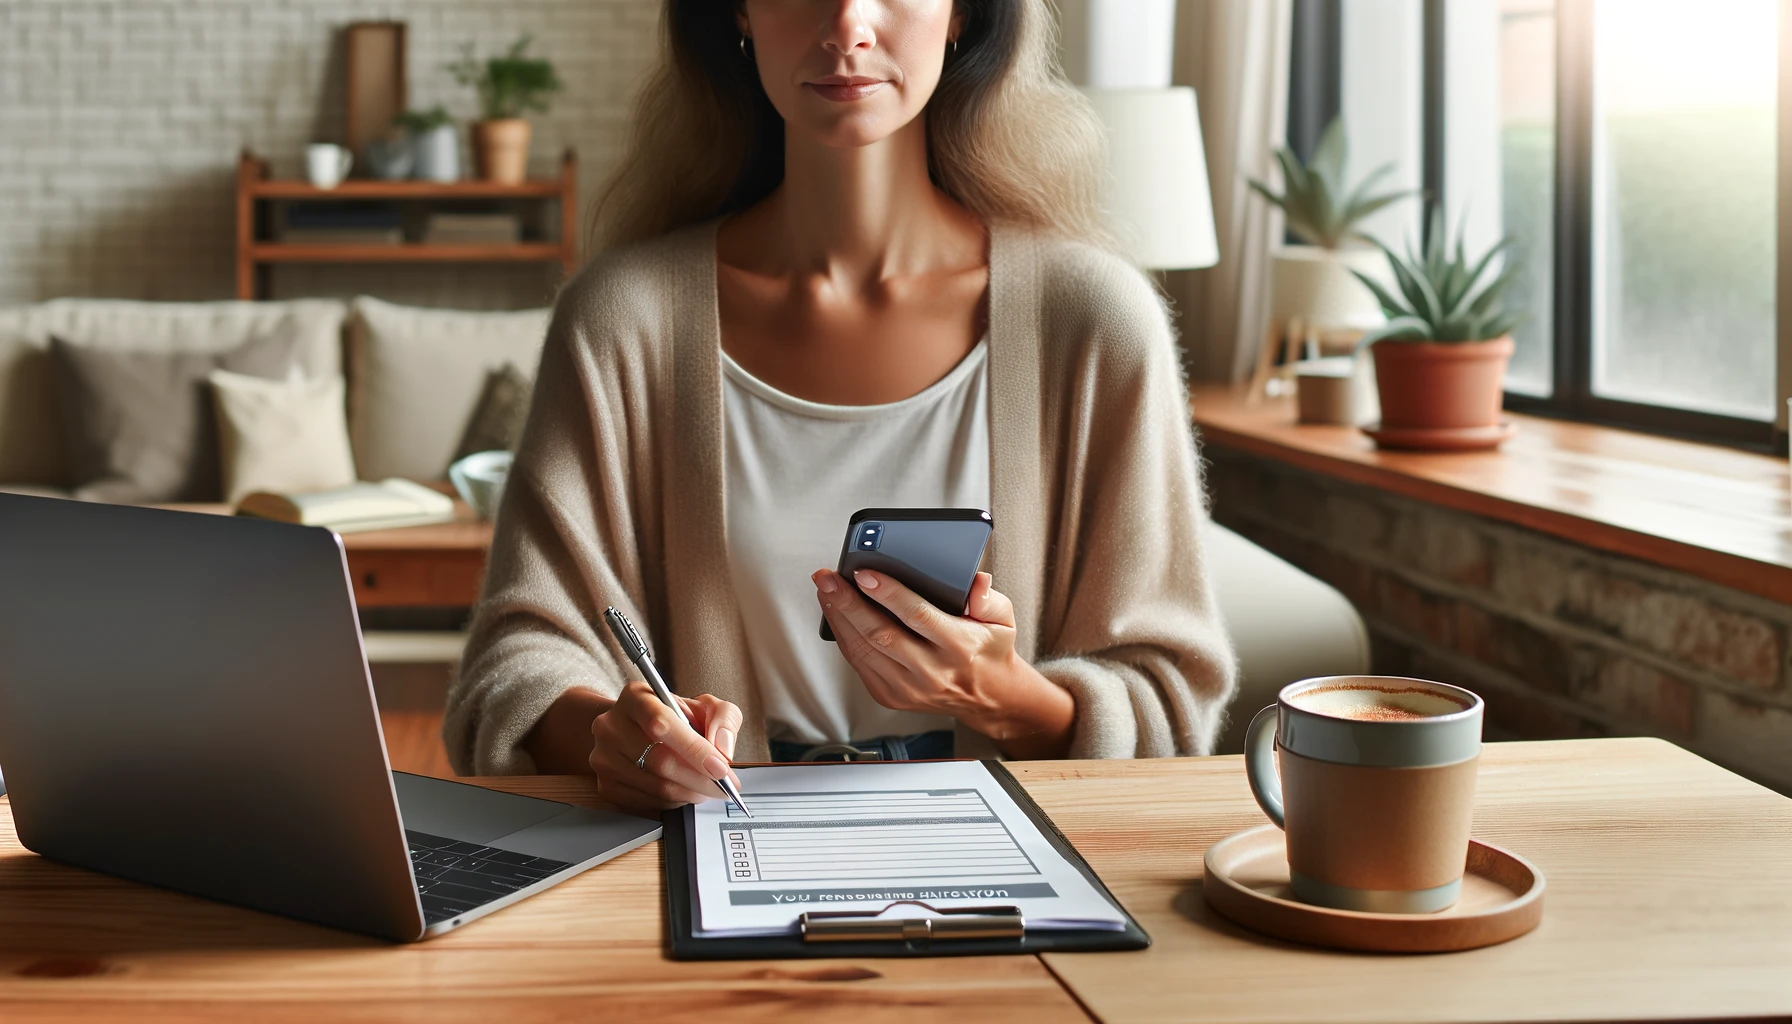 A realistic photograph of a woman sitting at a table with a laptop and a smartphone, filling out an online survey. The background includes a cozy home setting with a cup of coffee, a plant, and a notebook. The woman appears focused and engaged in the task.